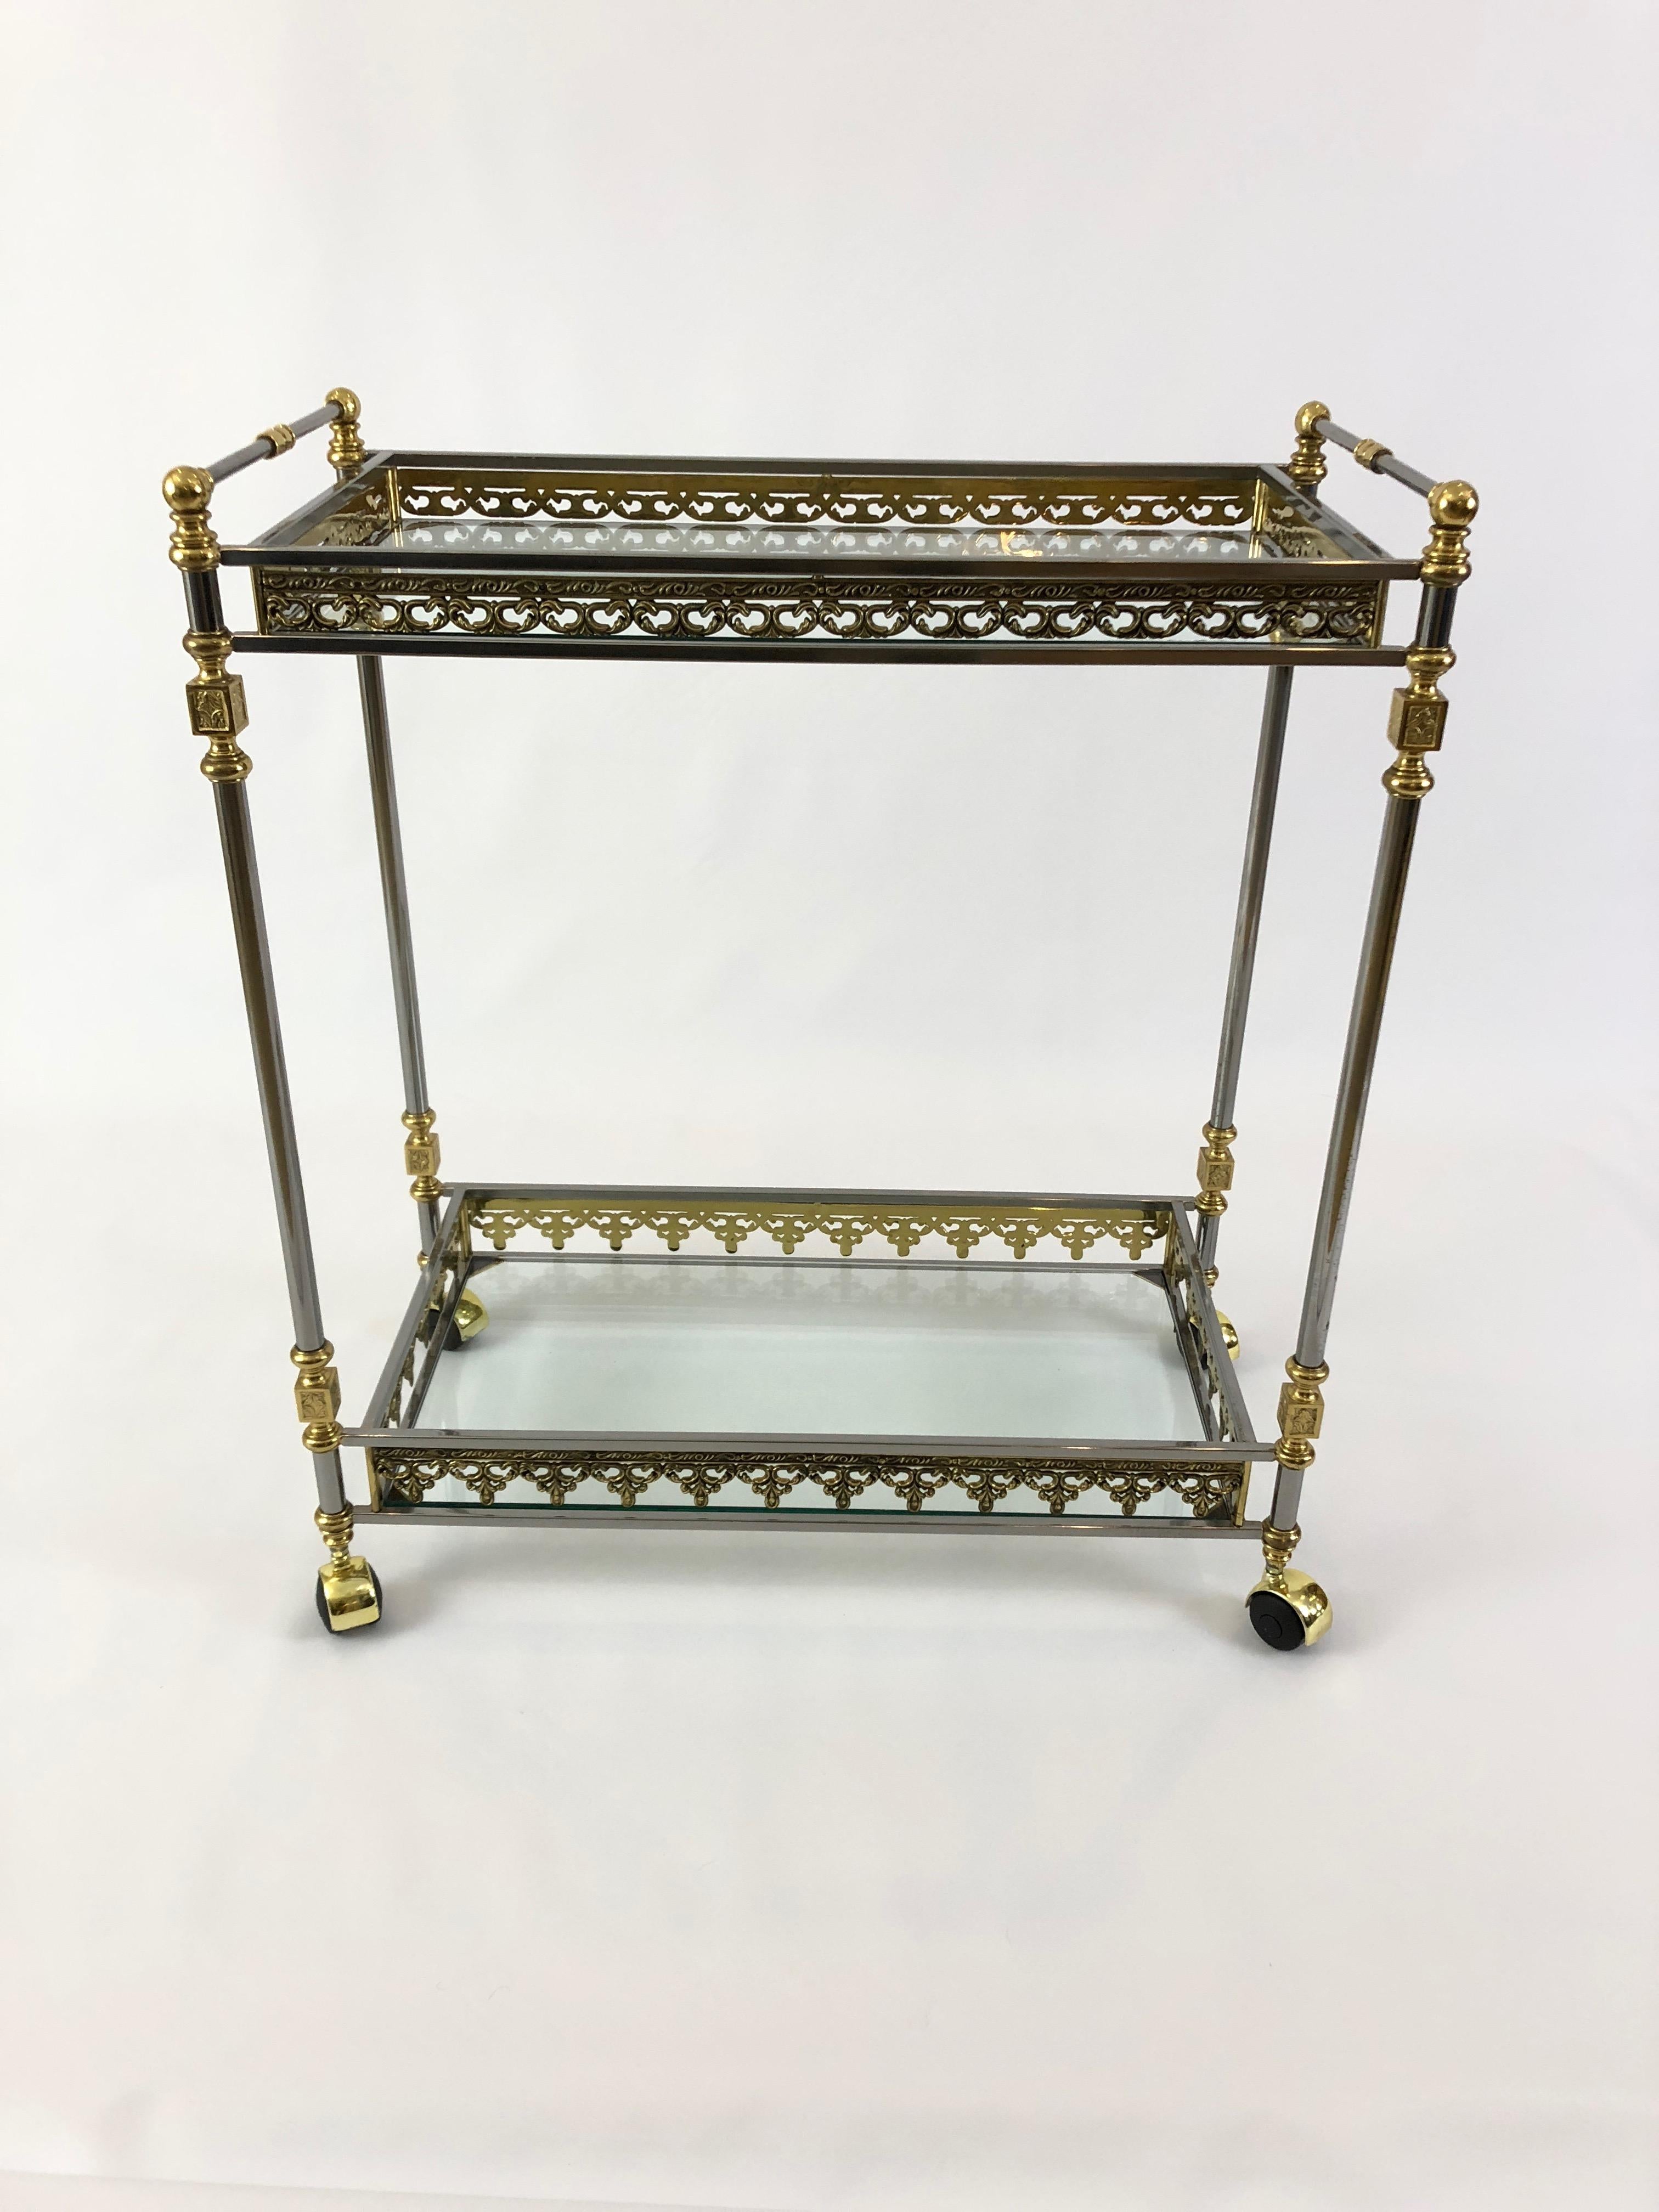 An unusually beautiful two-tier bar cart having an intricately decorative mix of brass and nickel with 2 glass shelves. Even the wheels are elegantly capped with brass. A rare find.